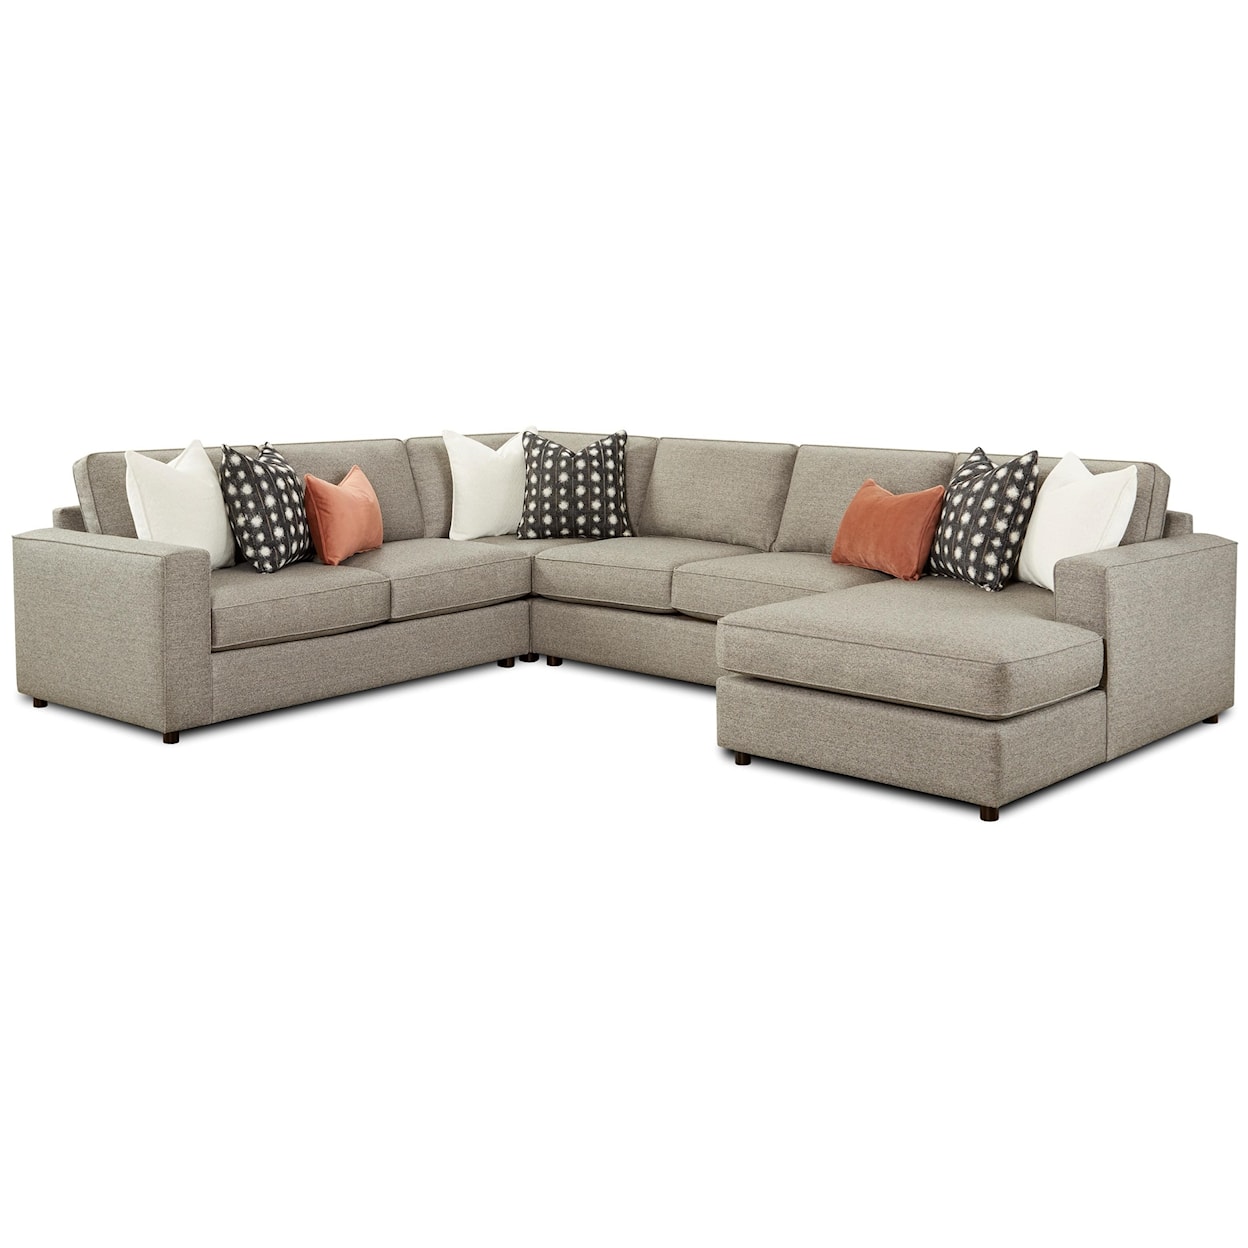 Fusion Furniture 2061 MONROE ASH 4-Piece Sectional with Chaise